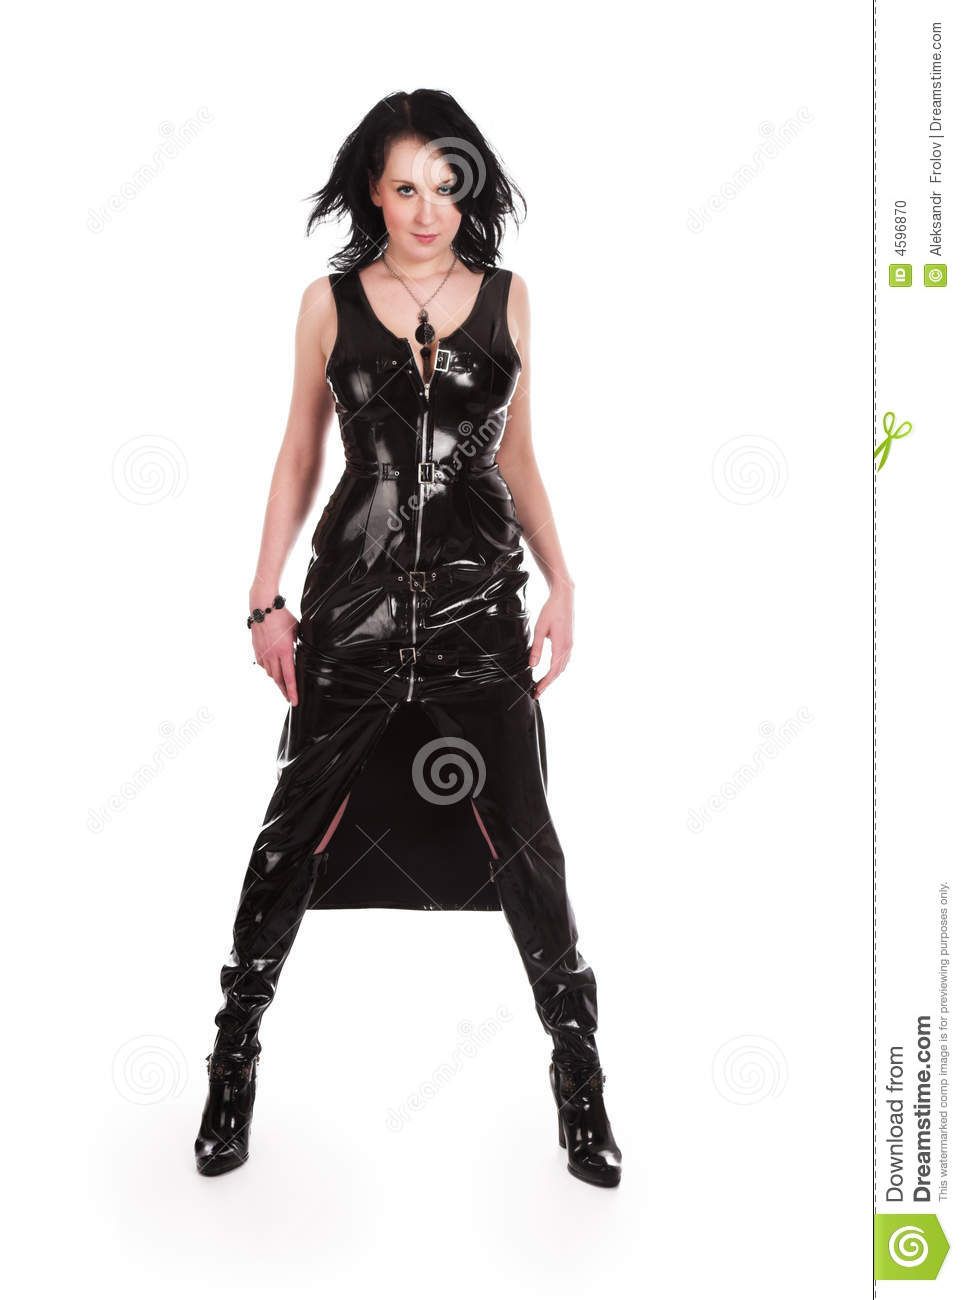 Lady L. reccomend Domination leather fetish clothing